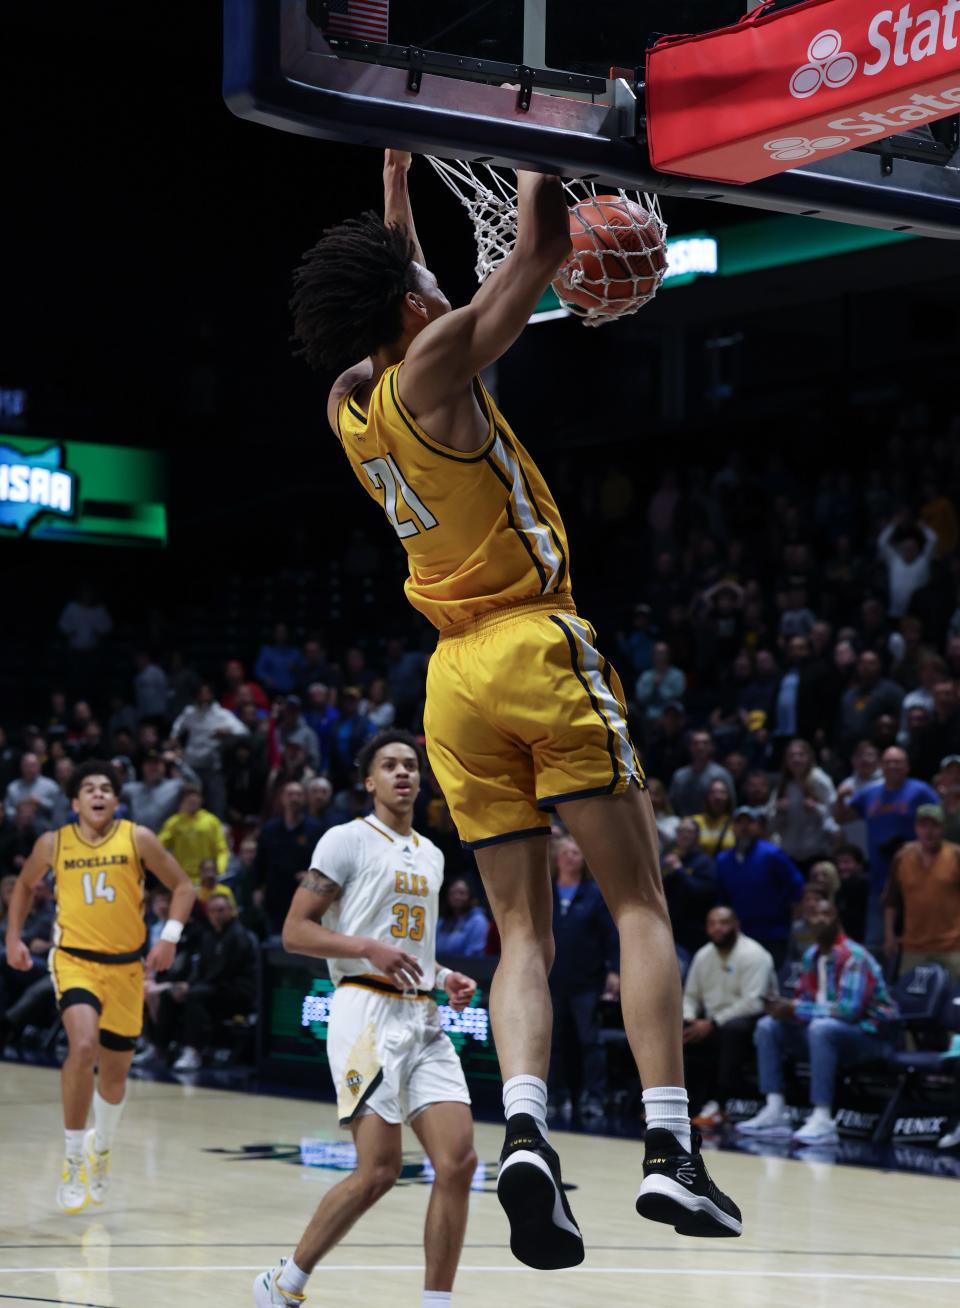 Alex Kazanecki of Moeller on this dunk gives them a 63-57 lead with 1:36 left in the first overtime. Moeller played Centerville in a Division I regional final. Centerville won in double overtime 70-69.